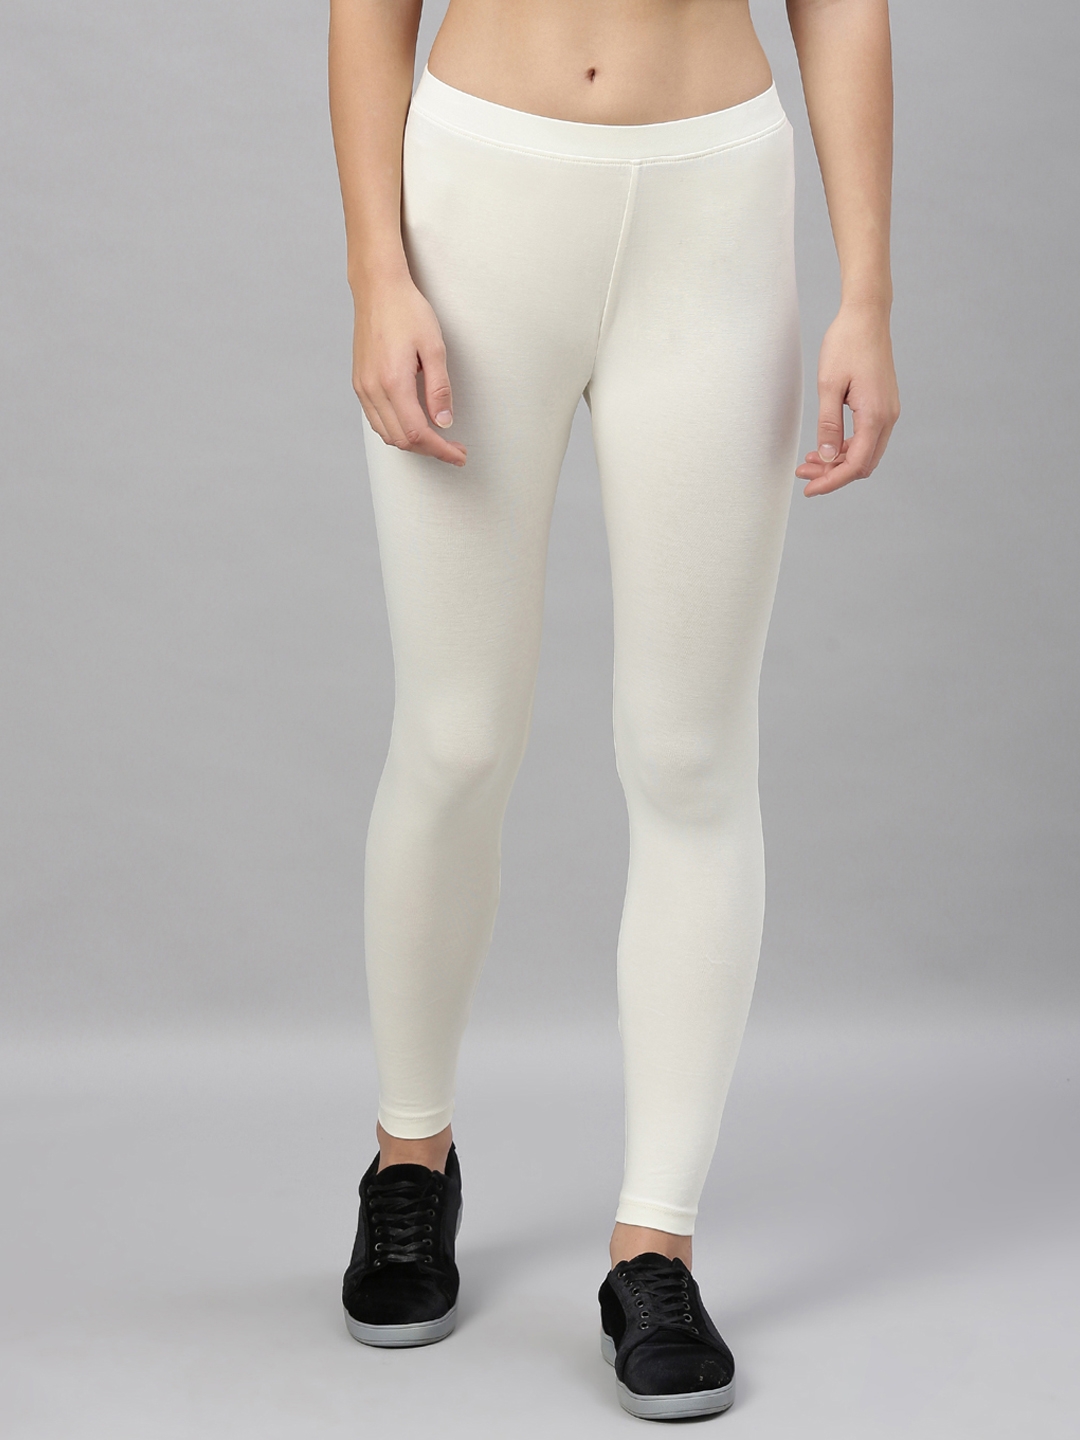 Kryptic | Kryptic Women's Cotton Stretch Solid Ankle Length Leggings 0